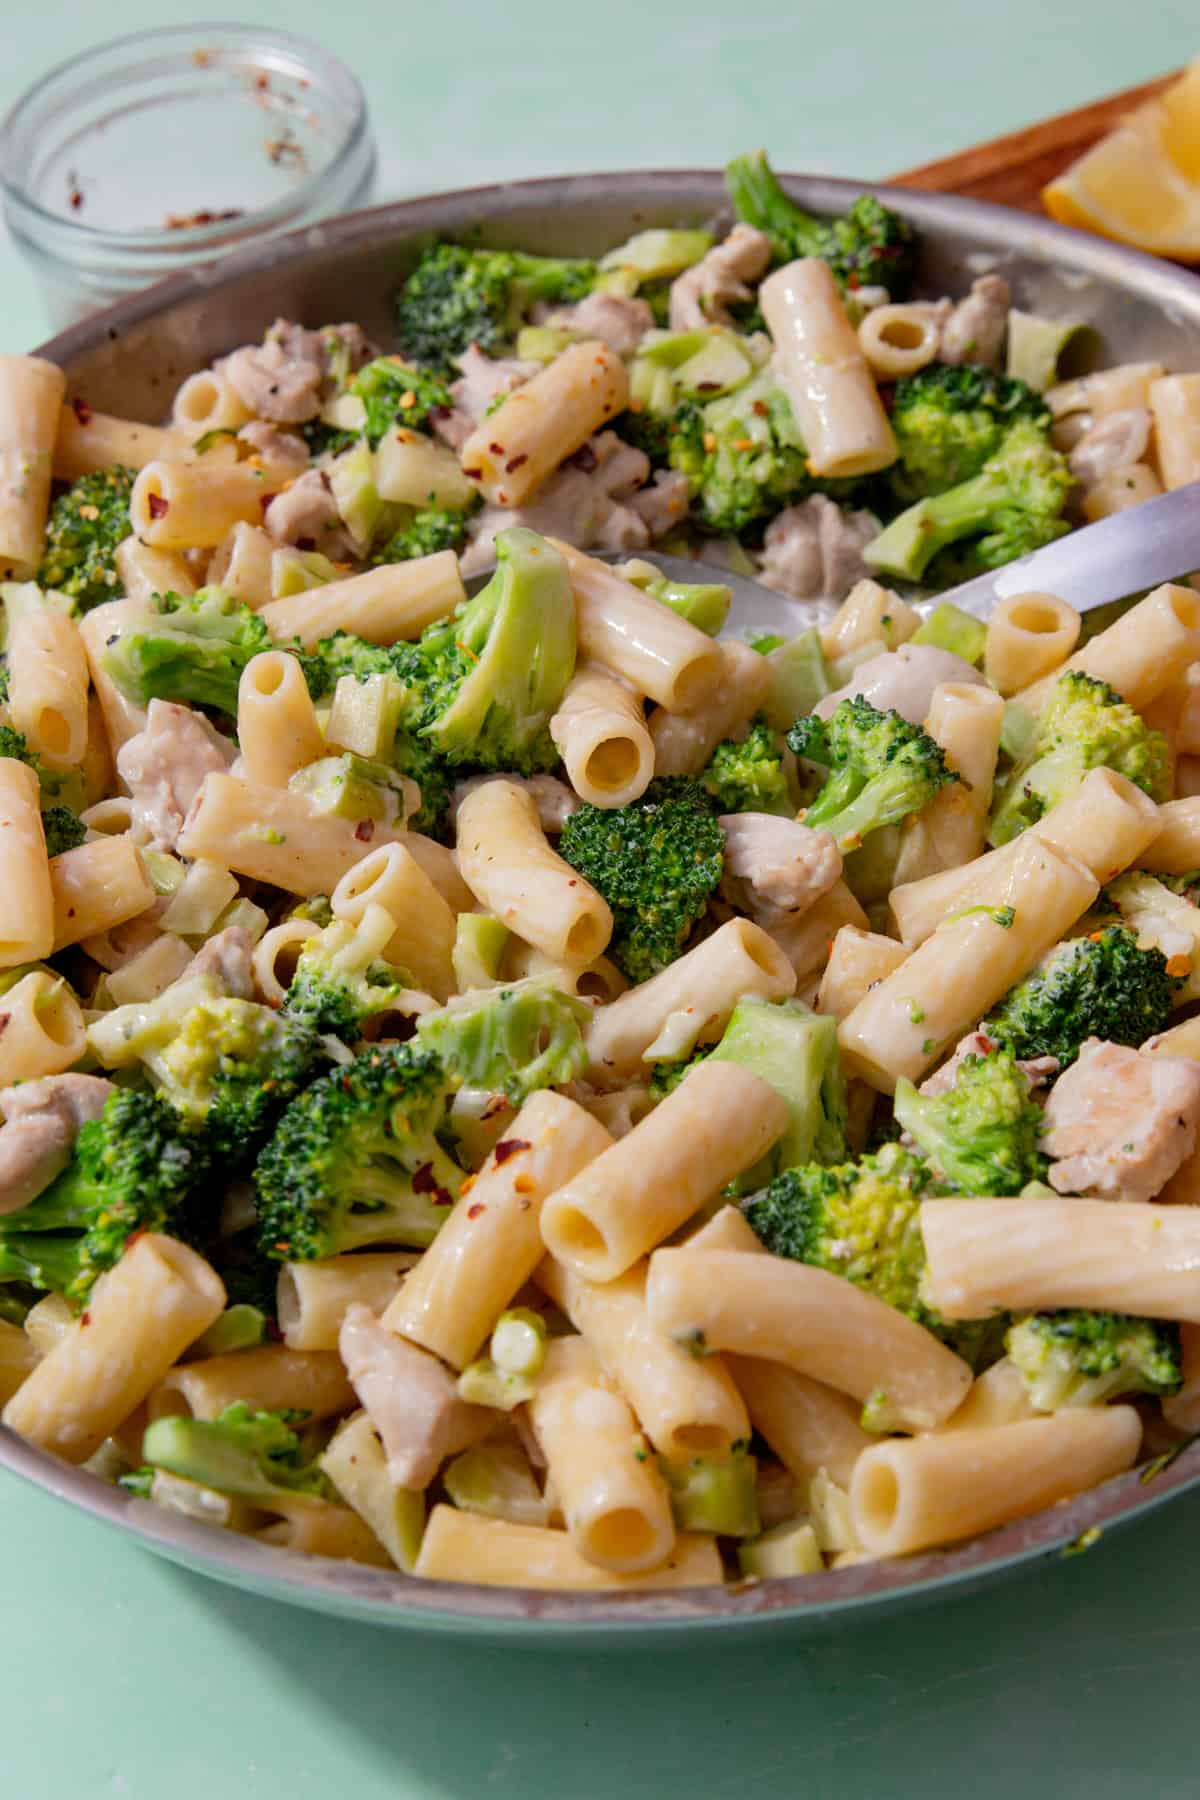 A large pan with broccoli, rigatoni pasta and chicken pieces, with a large metal spoon in the pasta.  